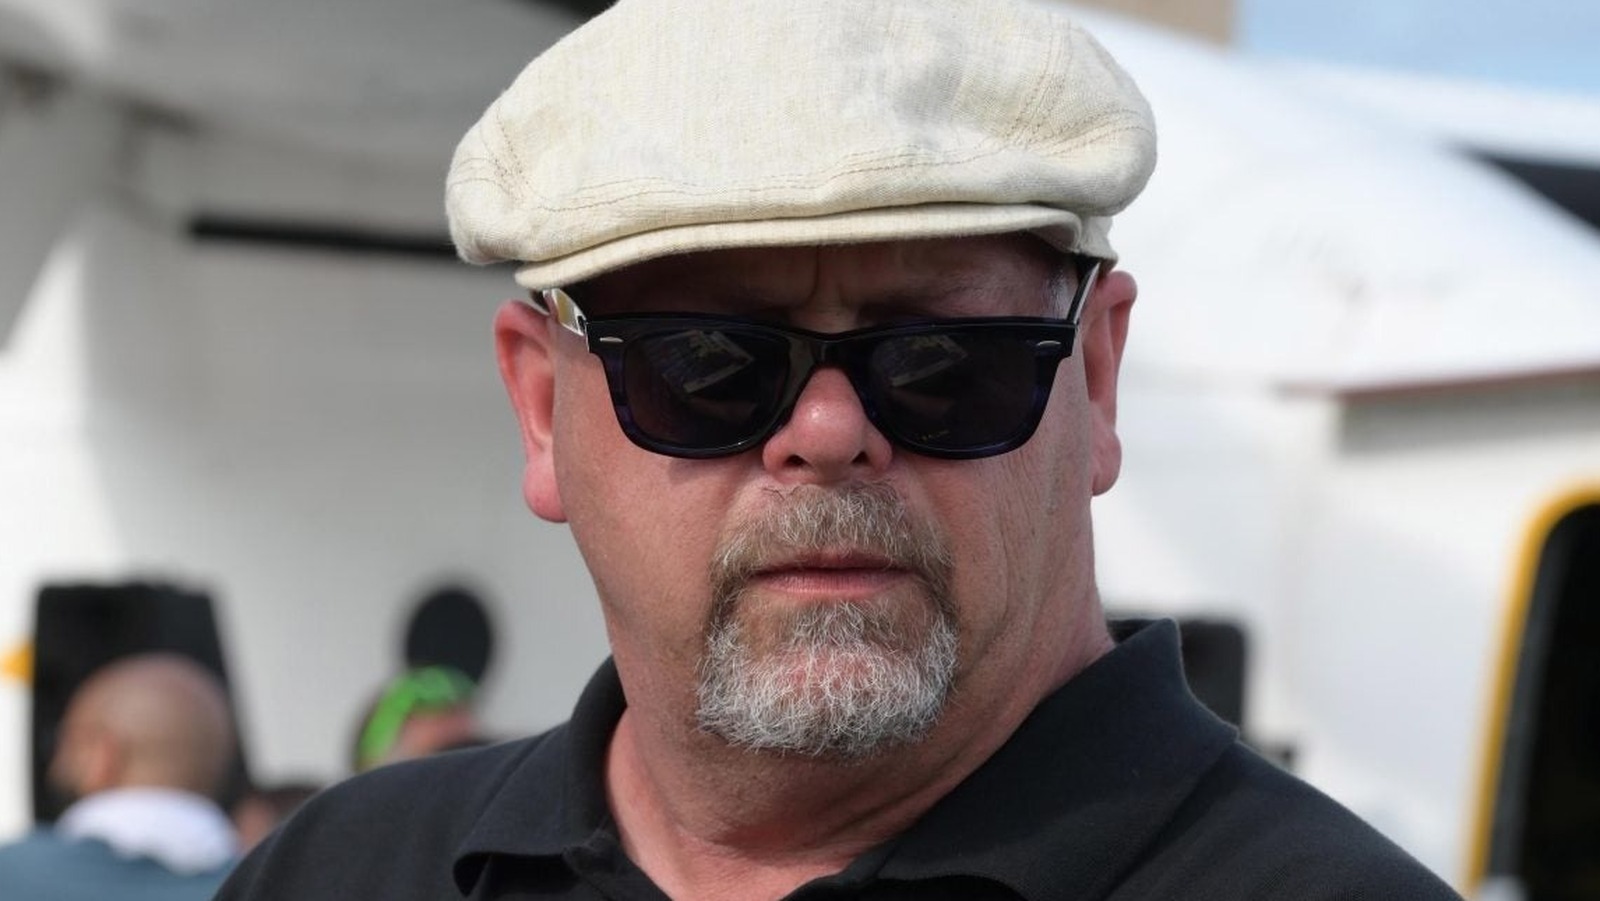 Where Is Pawn Stars Do America Filming New Episodes For Season 2